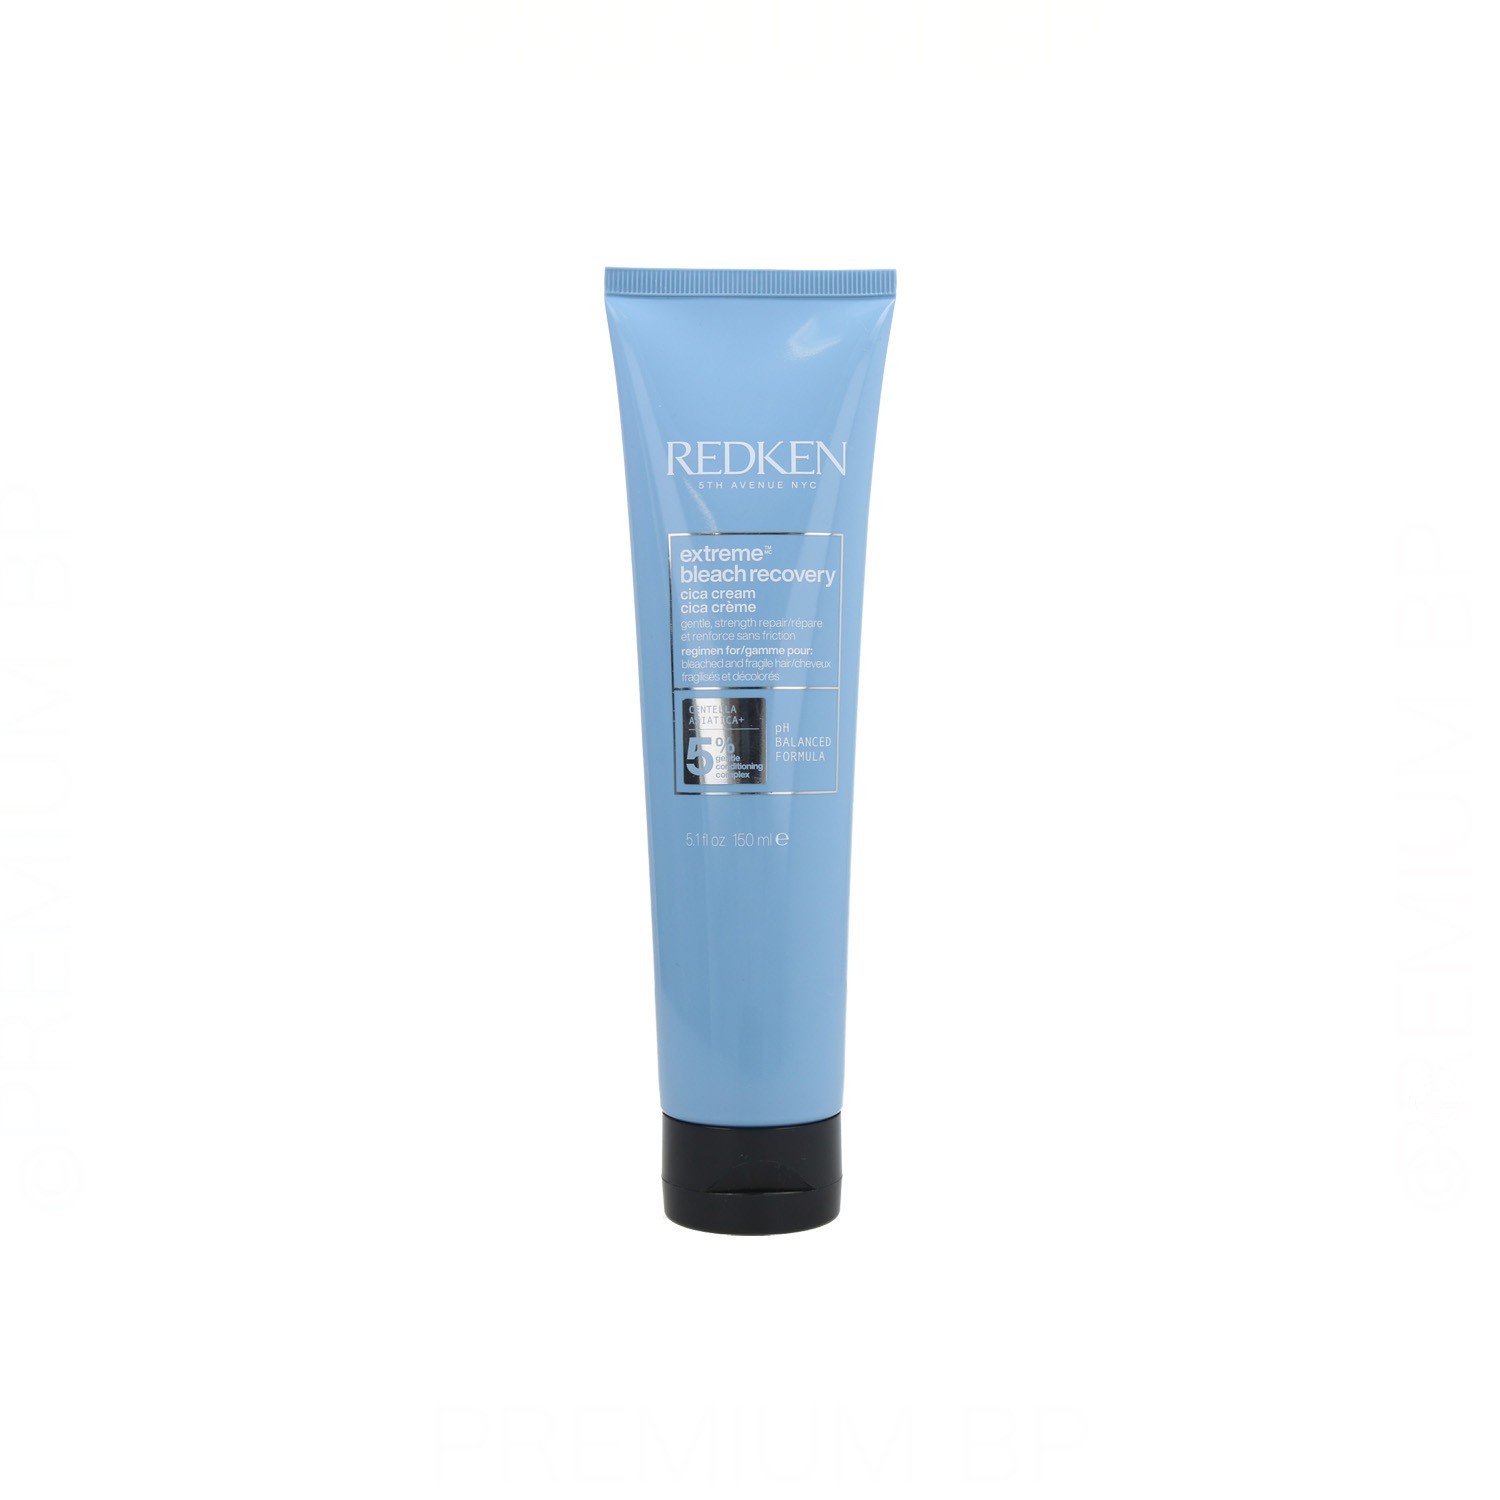 Redken Extreme Bleach Recovery Crema Cica 150 ml